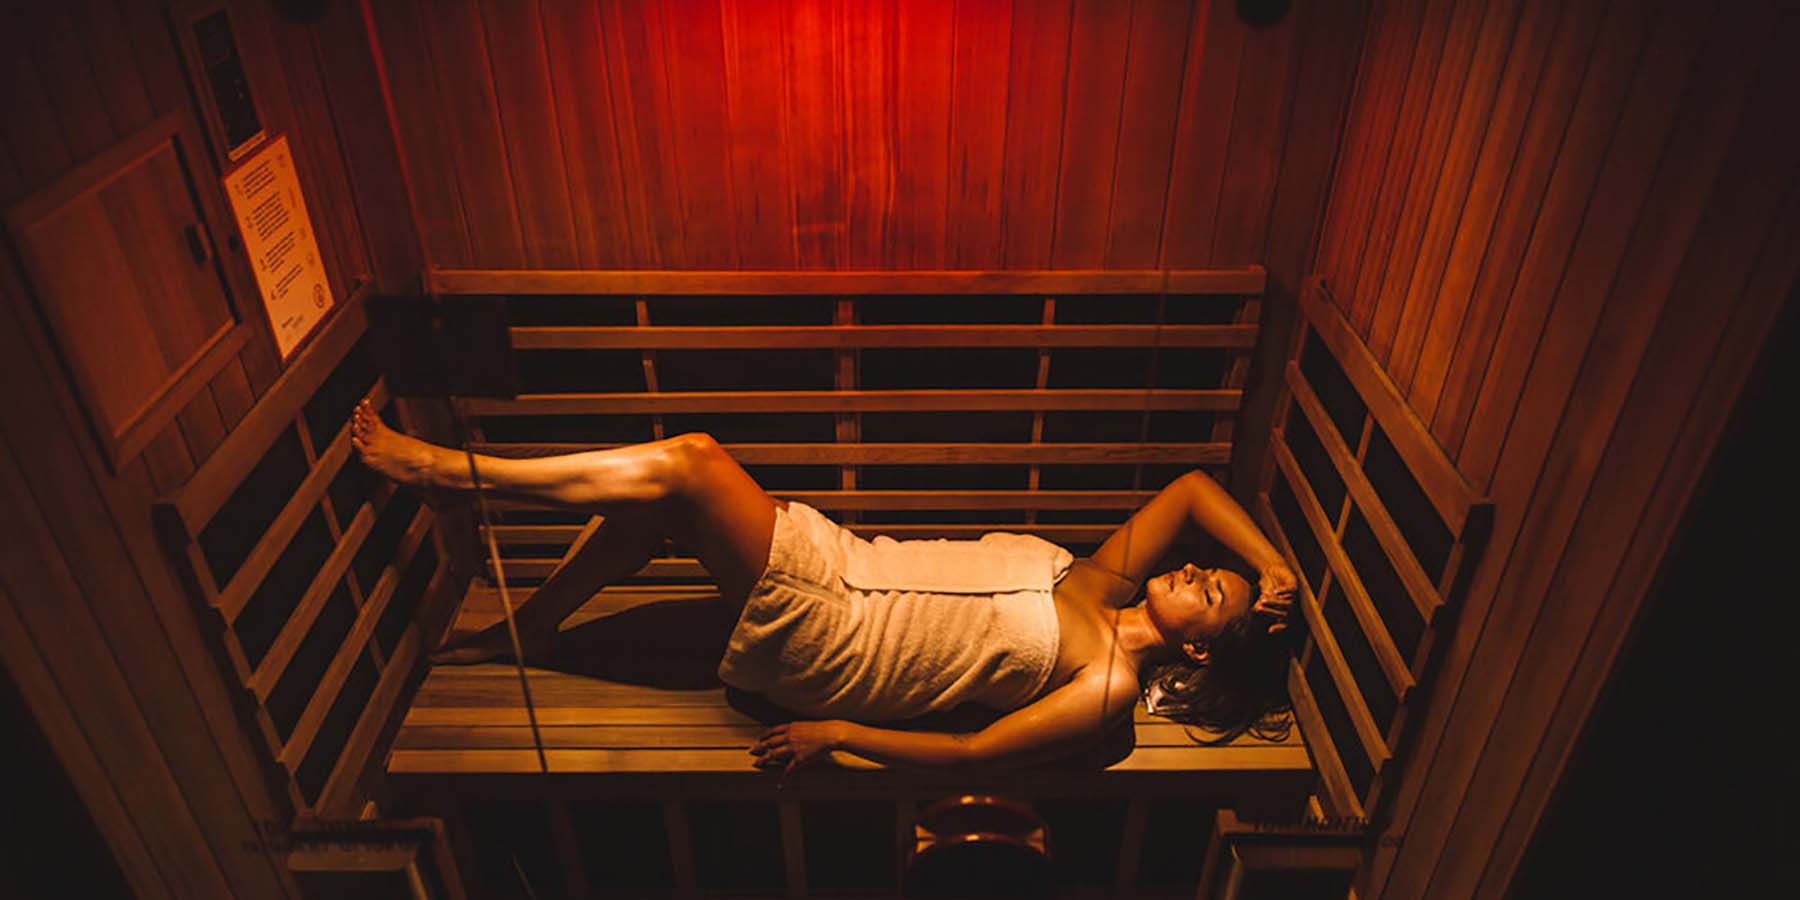 Infrared Sauna Therapy